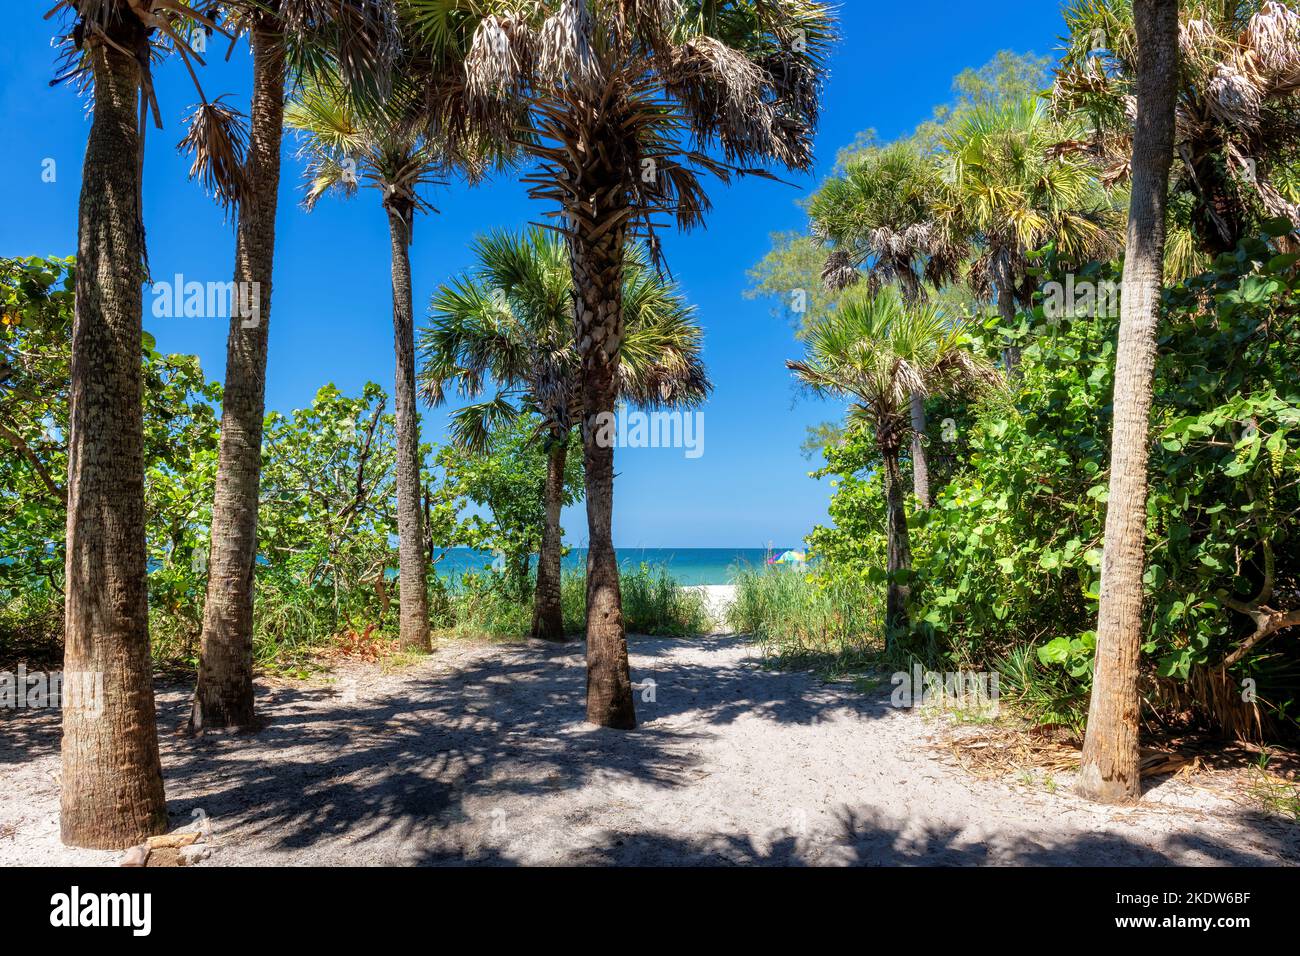 Palm trees at sunny day in beautiful tropical beach in paradise island in Florida Keys. Stock Photo